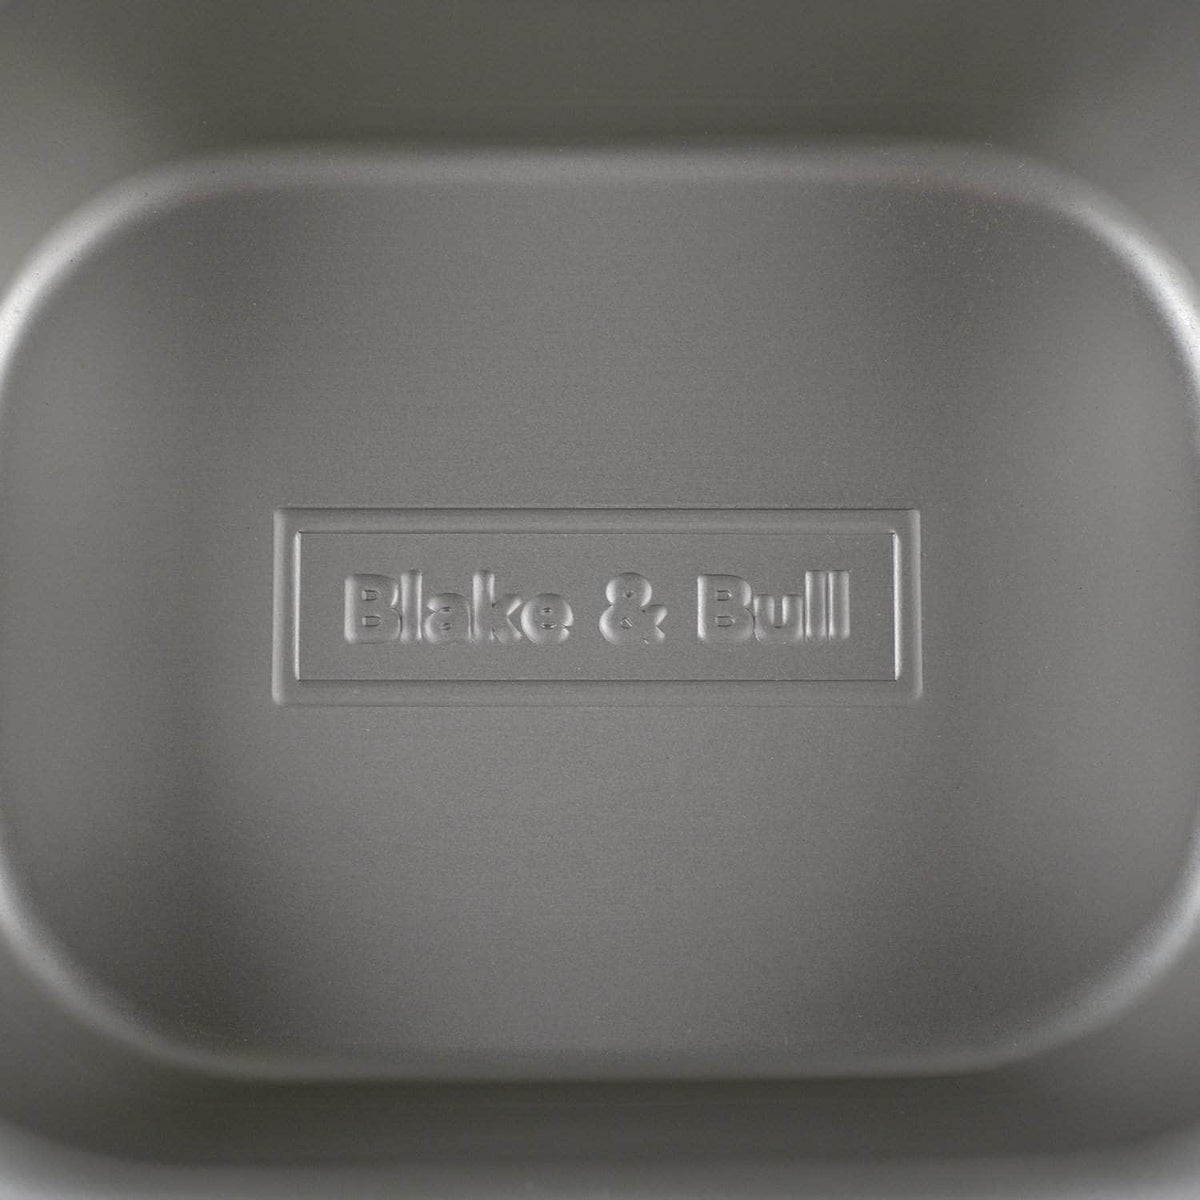 Farmhouse loaf tin with rounded corners